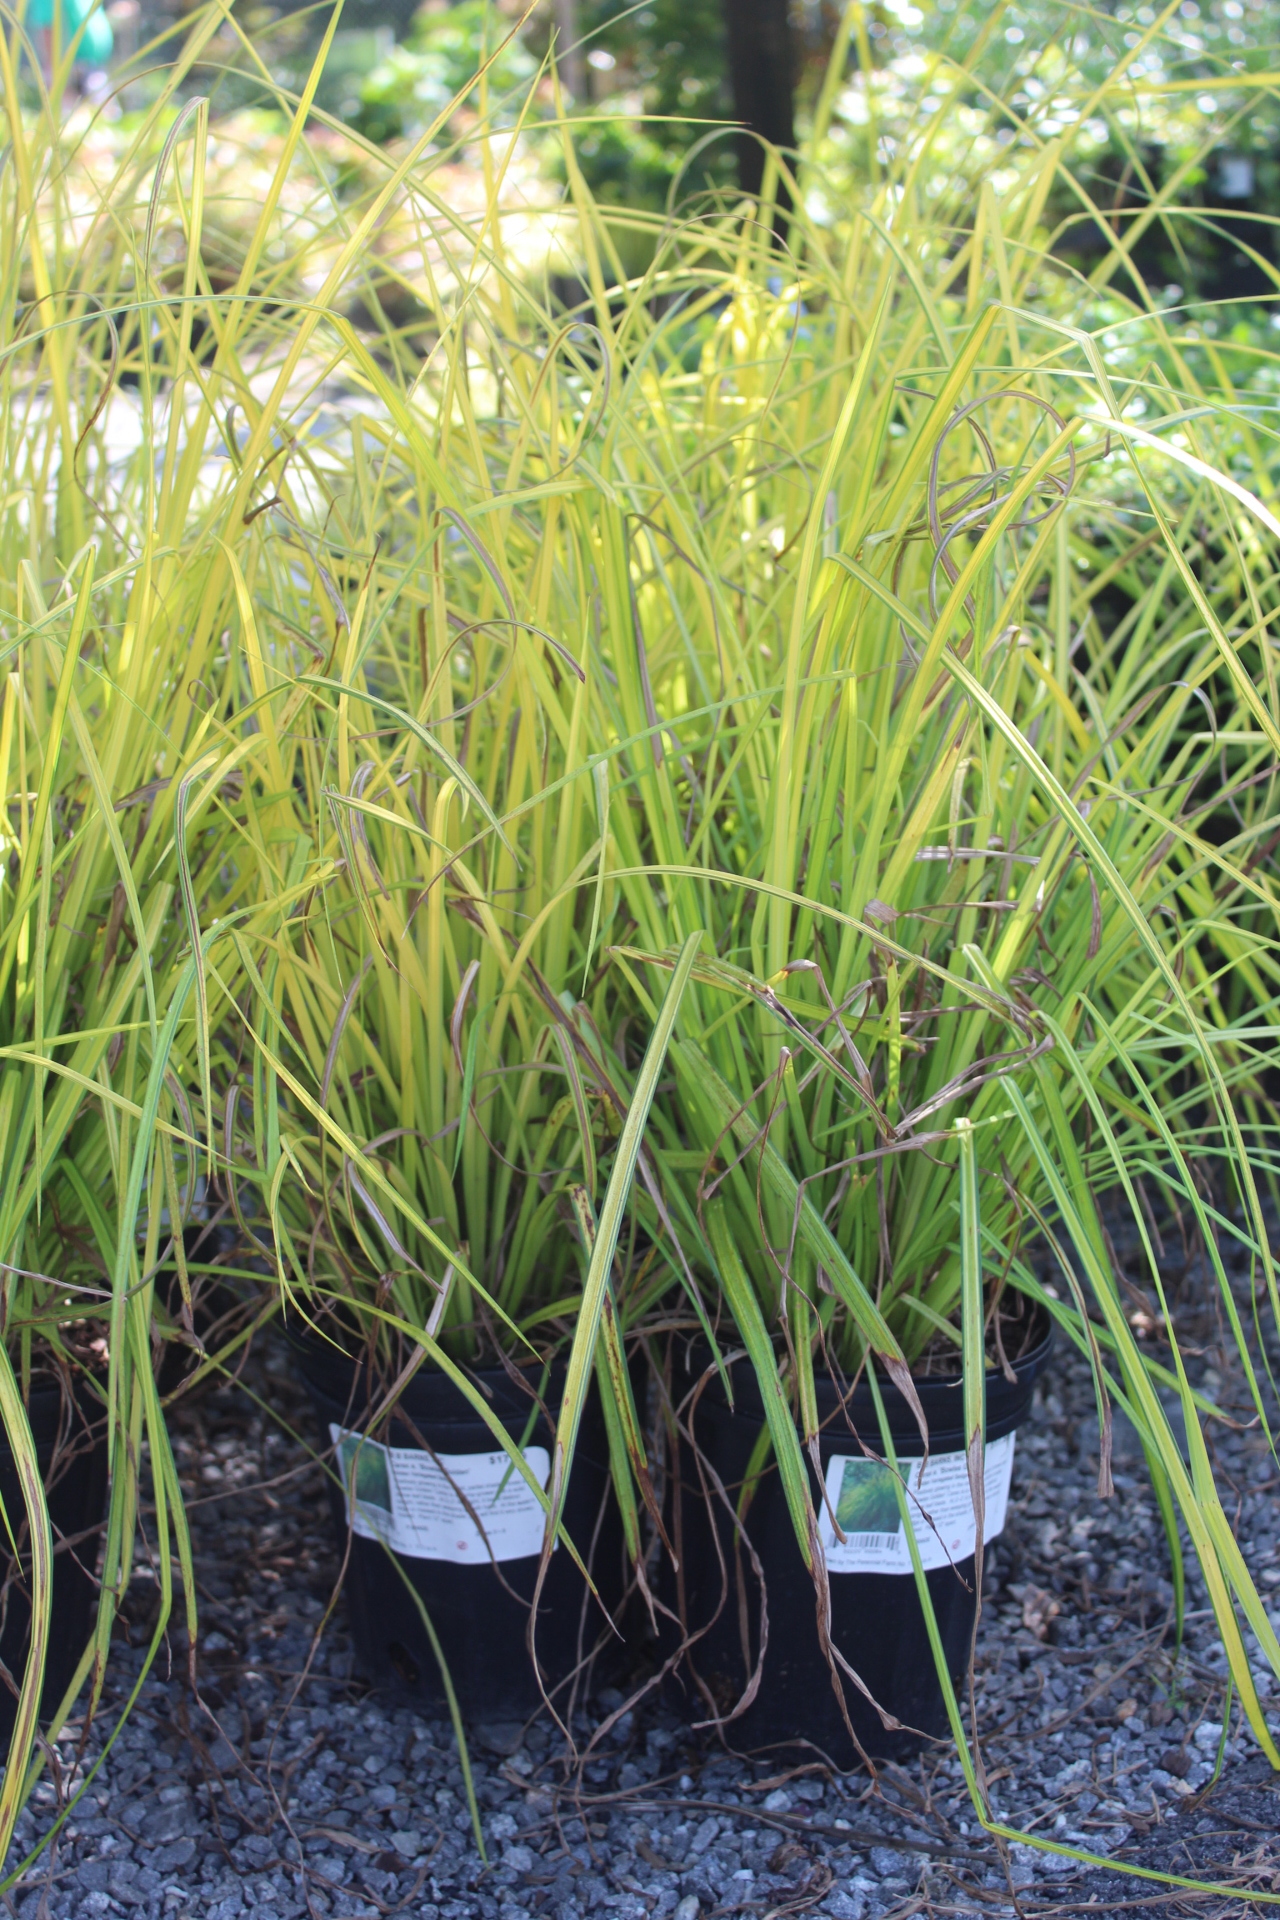 'Bowles Golden' Sedge is a bright chartreuse that reaches 2' tall, thrives in part sun-shade and loves wet soil, including standing water. Perfect for pond banks, rain gardens, and bogs.